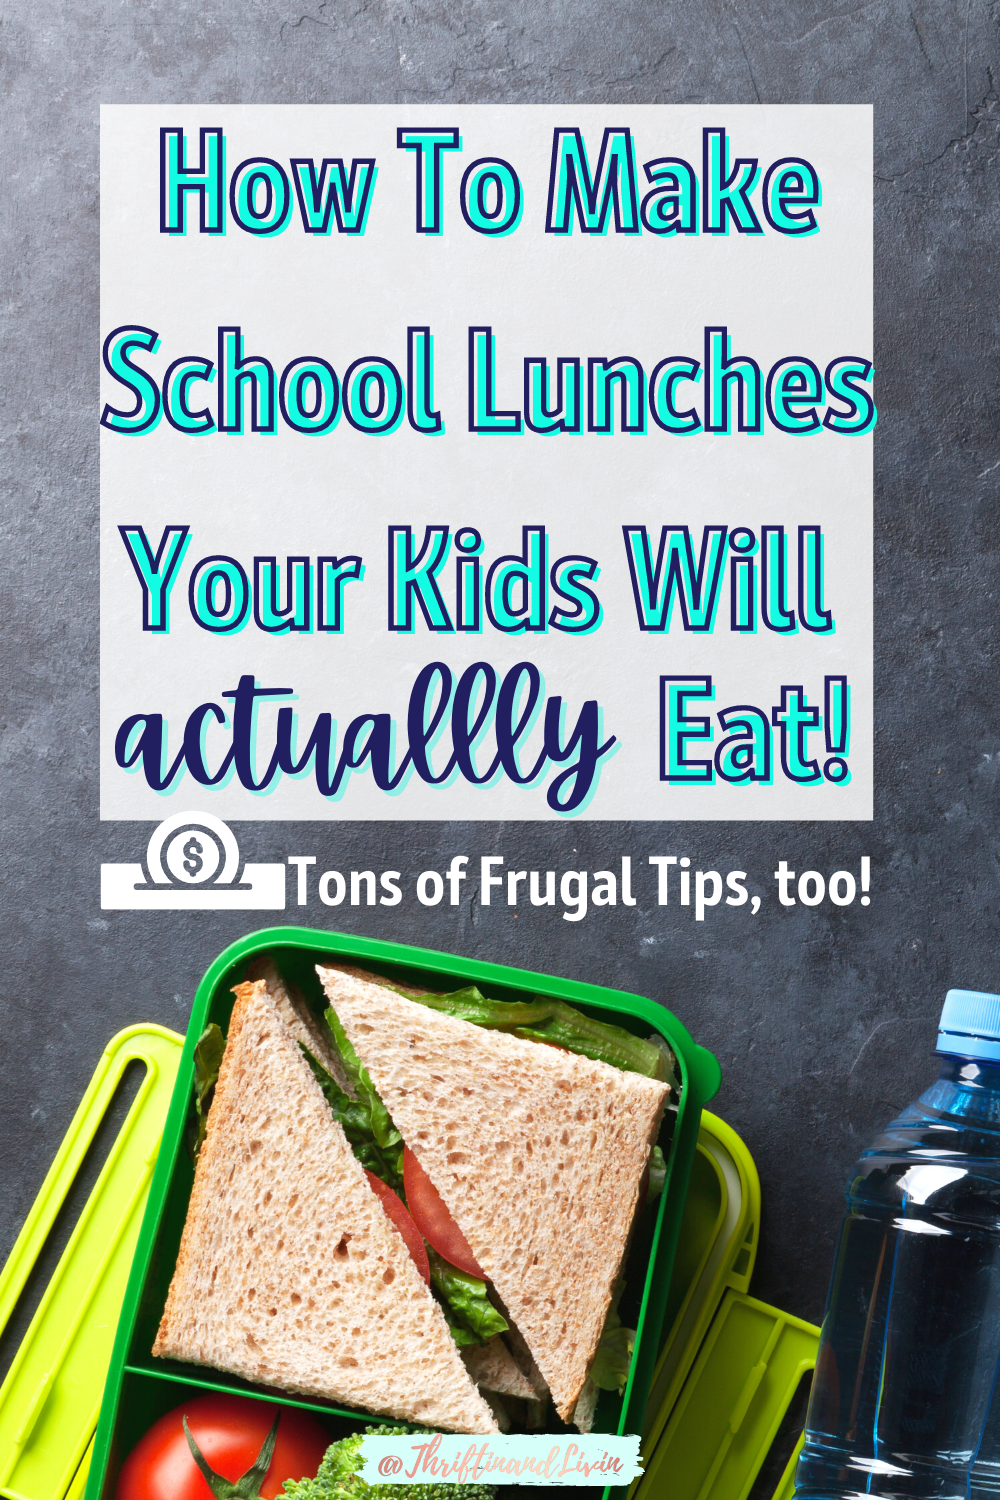 Pinterest Image - How To Make School Lunches Kids Will Actually Eat!